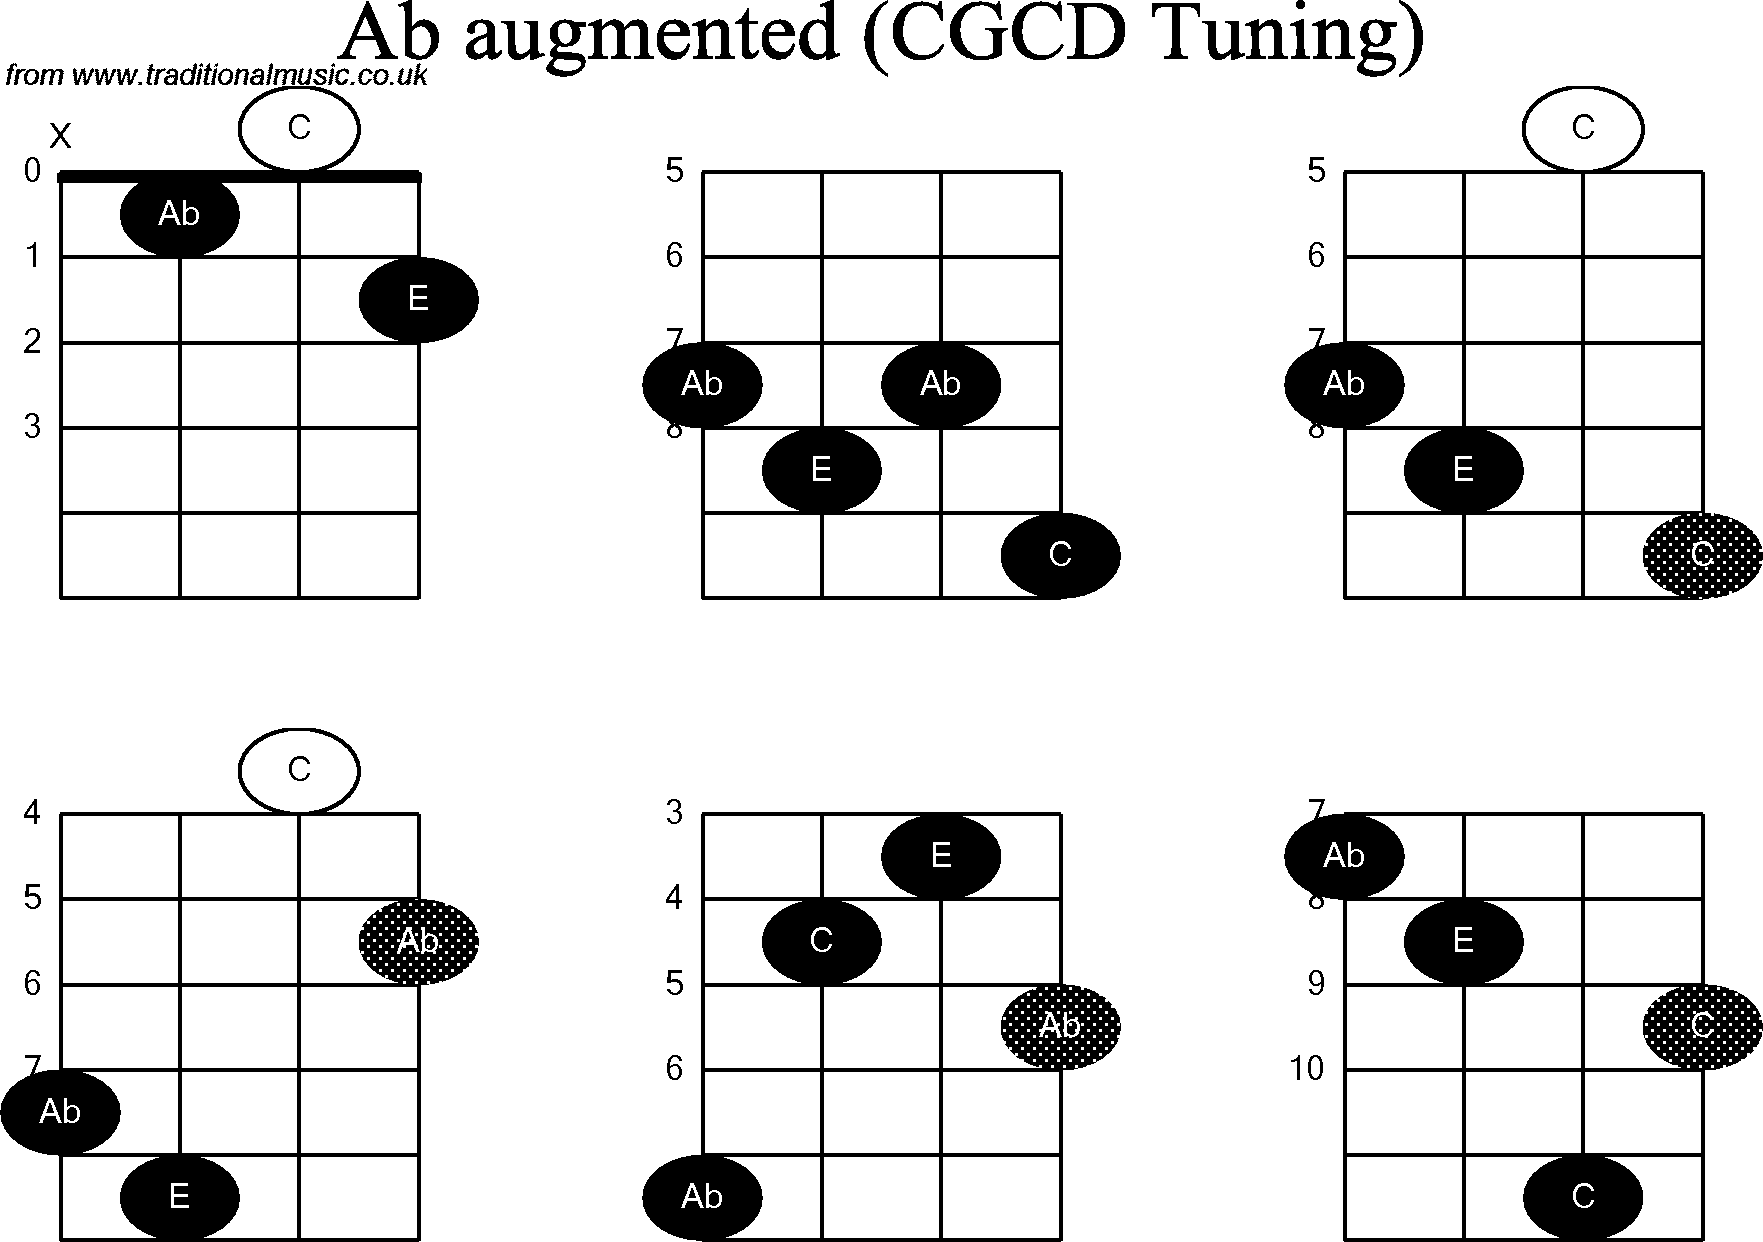 Chord diagrams for Banjo(Double C) Ab Augmented